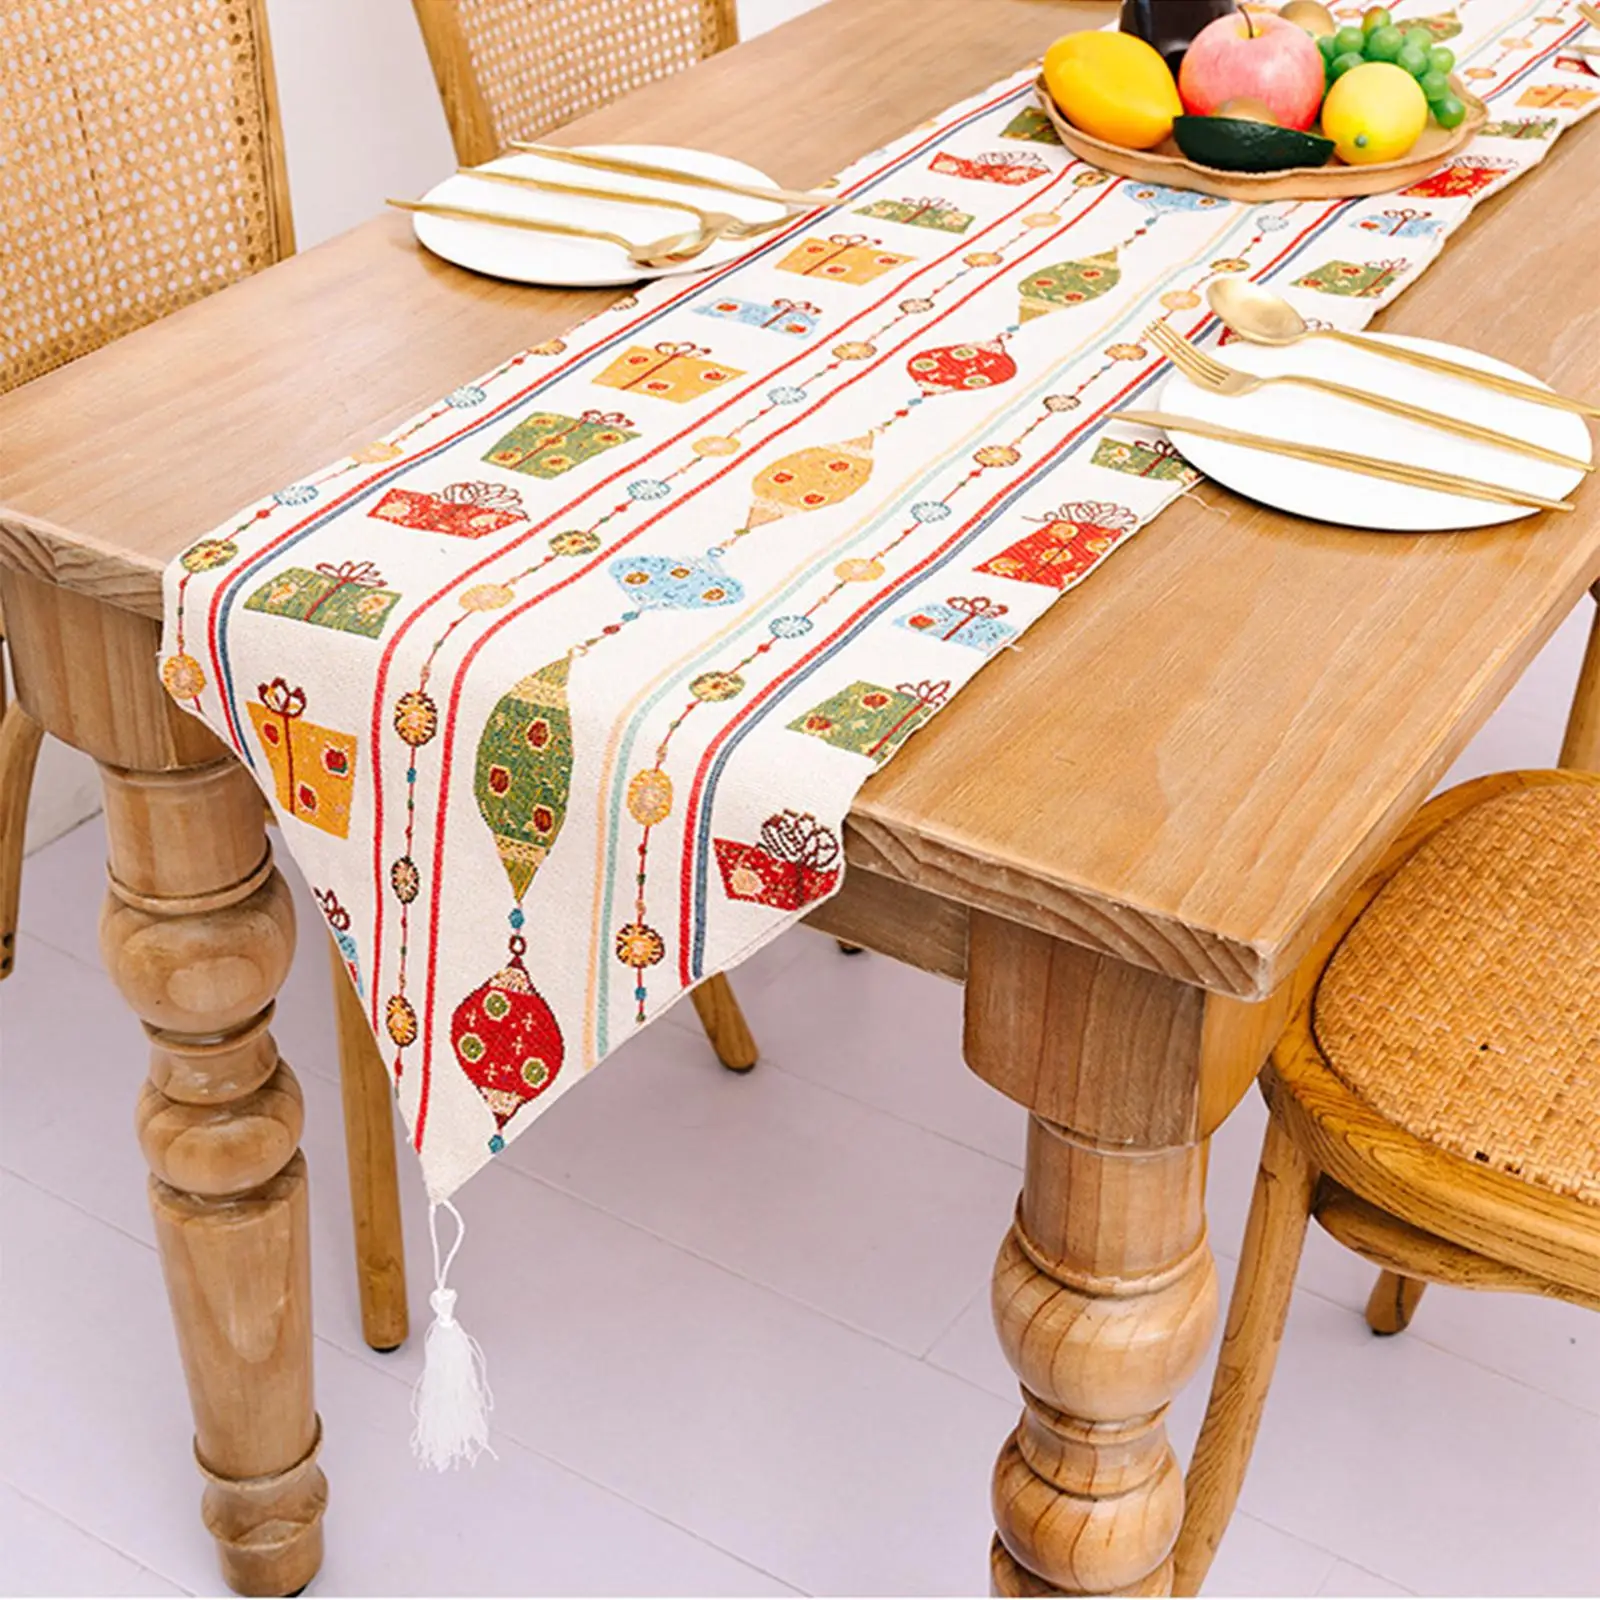 Tablecloth Breathable Decorative Desk Runner for Festival Dinner Parties Holiday